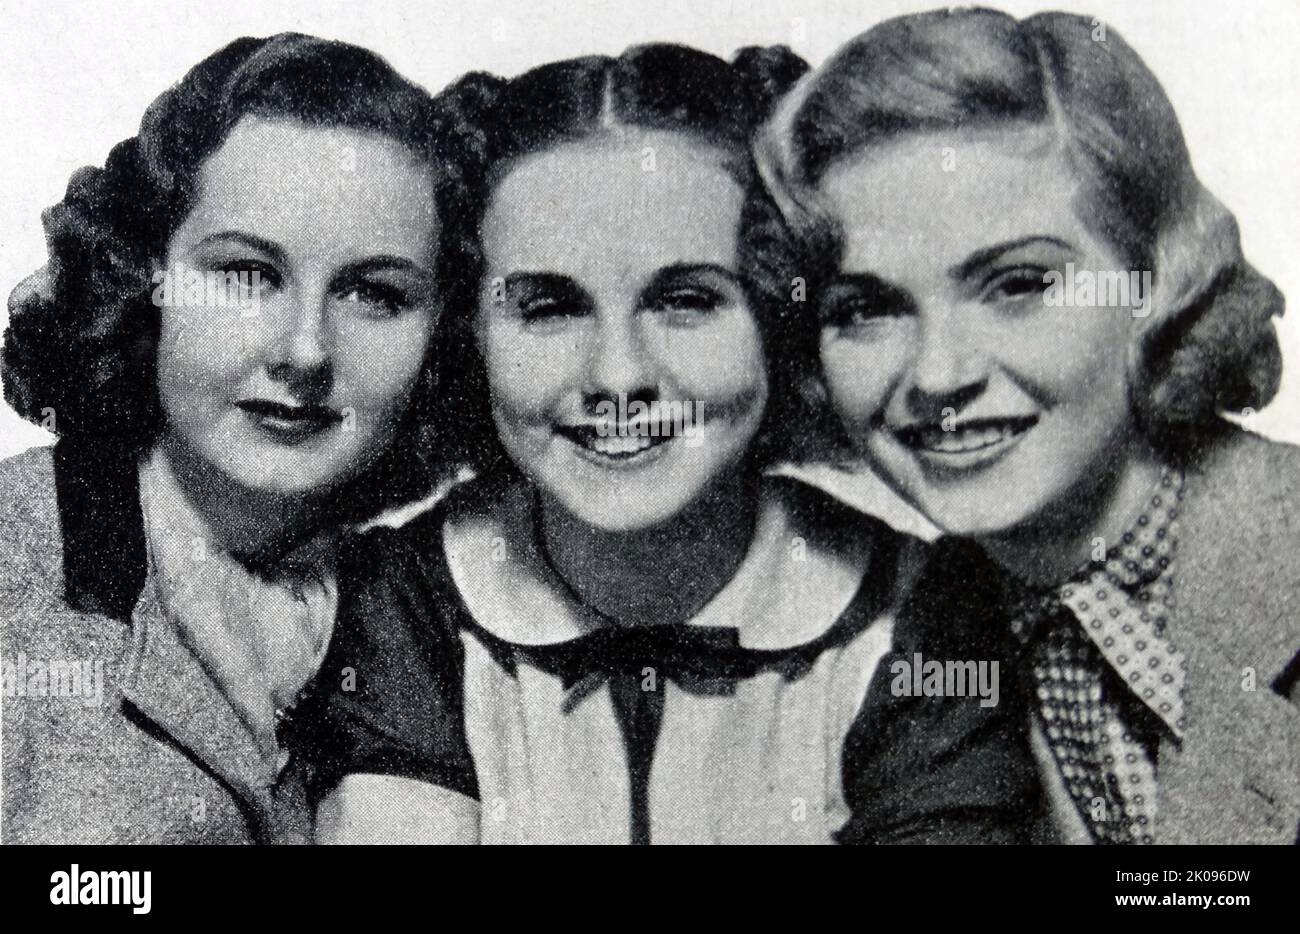 Deanna Durbin, Helen Parrish and Nan Grey in Three Smart Girls, a 1936 American musical comedy film. Edna Mae Durbin (December 4, 1921 - April 17, 2013), known professionally as Deanna Durbin, was a Canadian-born actress and singer who later settled in France. She appeared in musical films in the 1930s and 1940s. Helen Parrish (March 12, 1923 - February 22, 1959) was an American stage and film actress. Nan Grey (born Eschal Loleet Grey Miller, July 25, 1918 - July 25, 1993) was an American film actress. Stock Photo